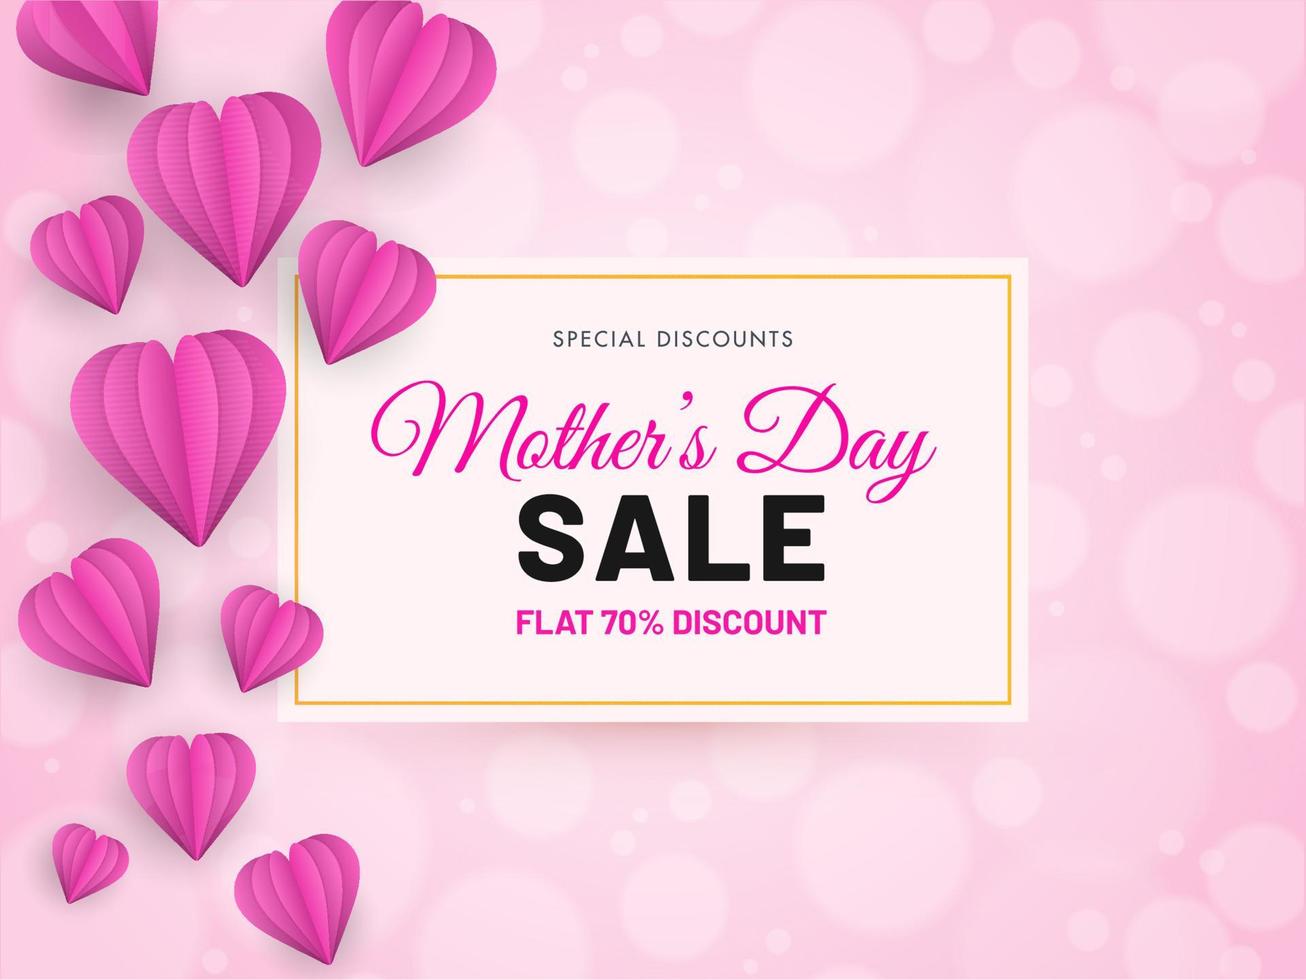 Mother's Day Sale Poster Design with Discount Offer and Origami Paper Hearts Decorated on Pink Bokeh Blur Background. vector